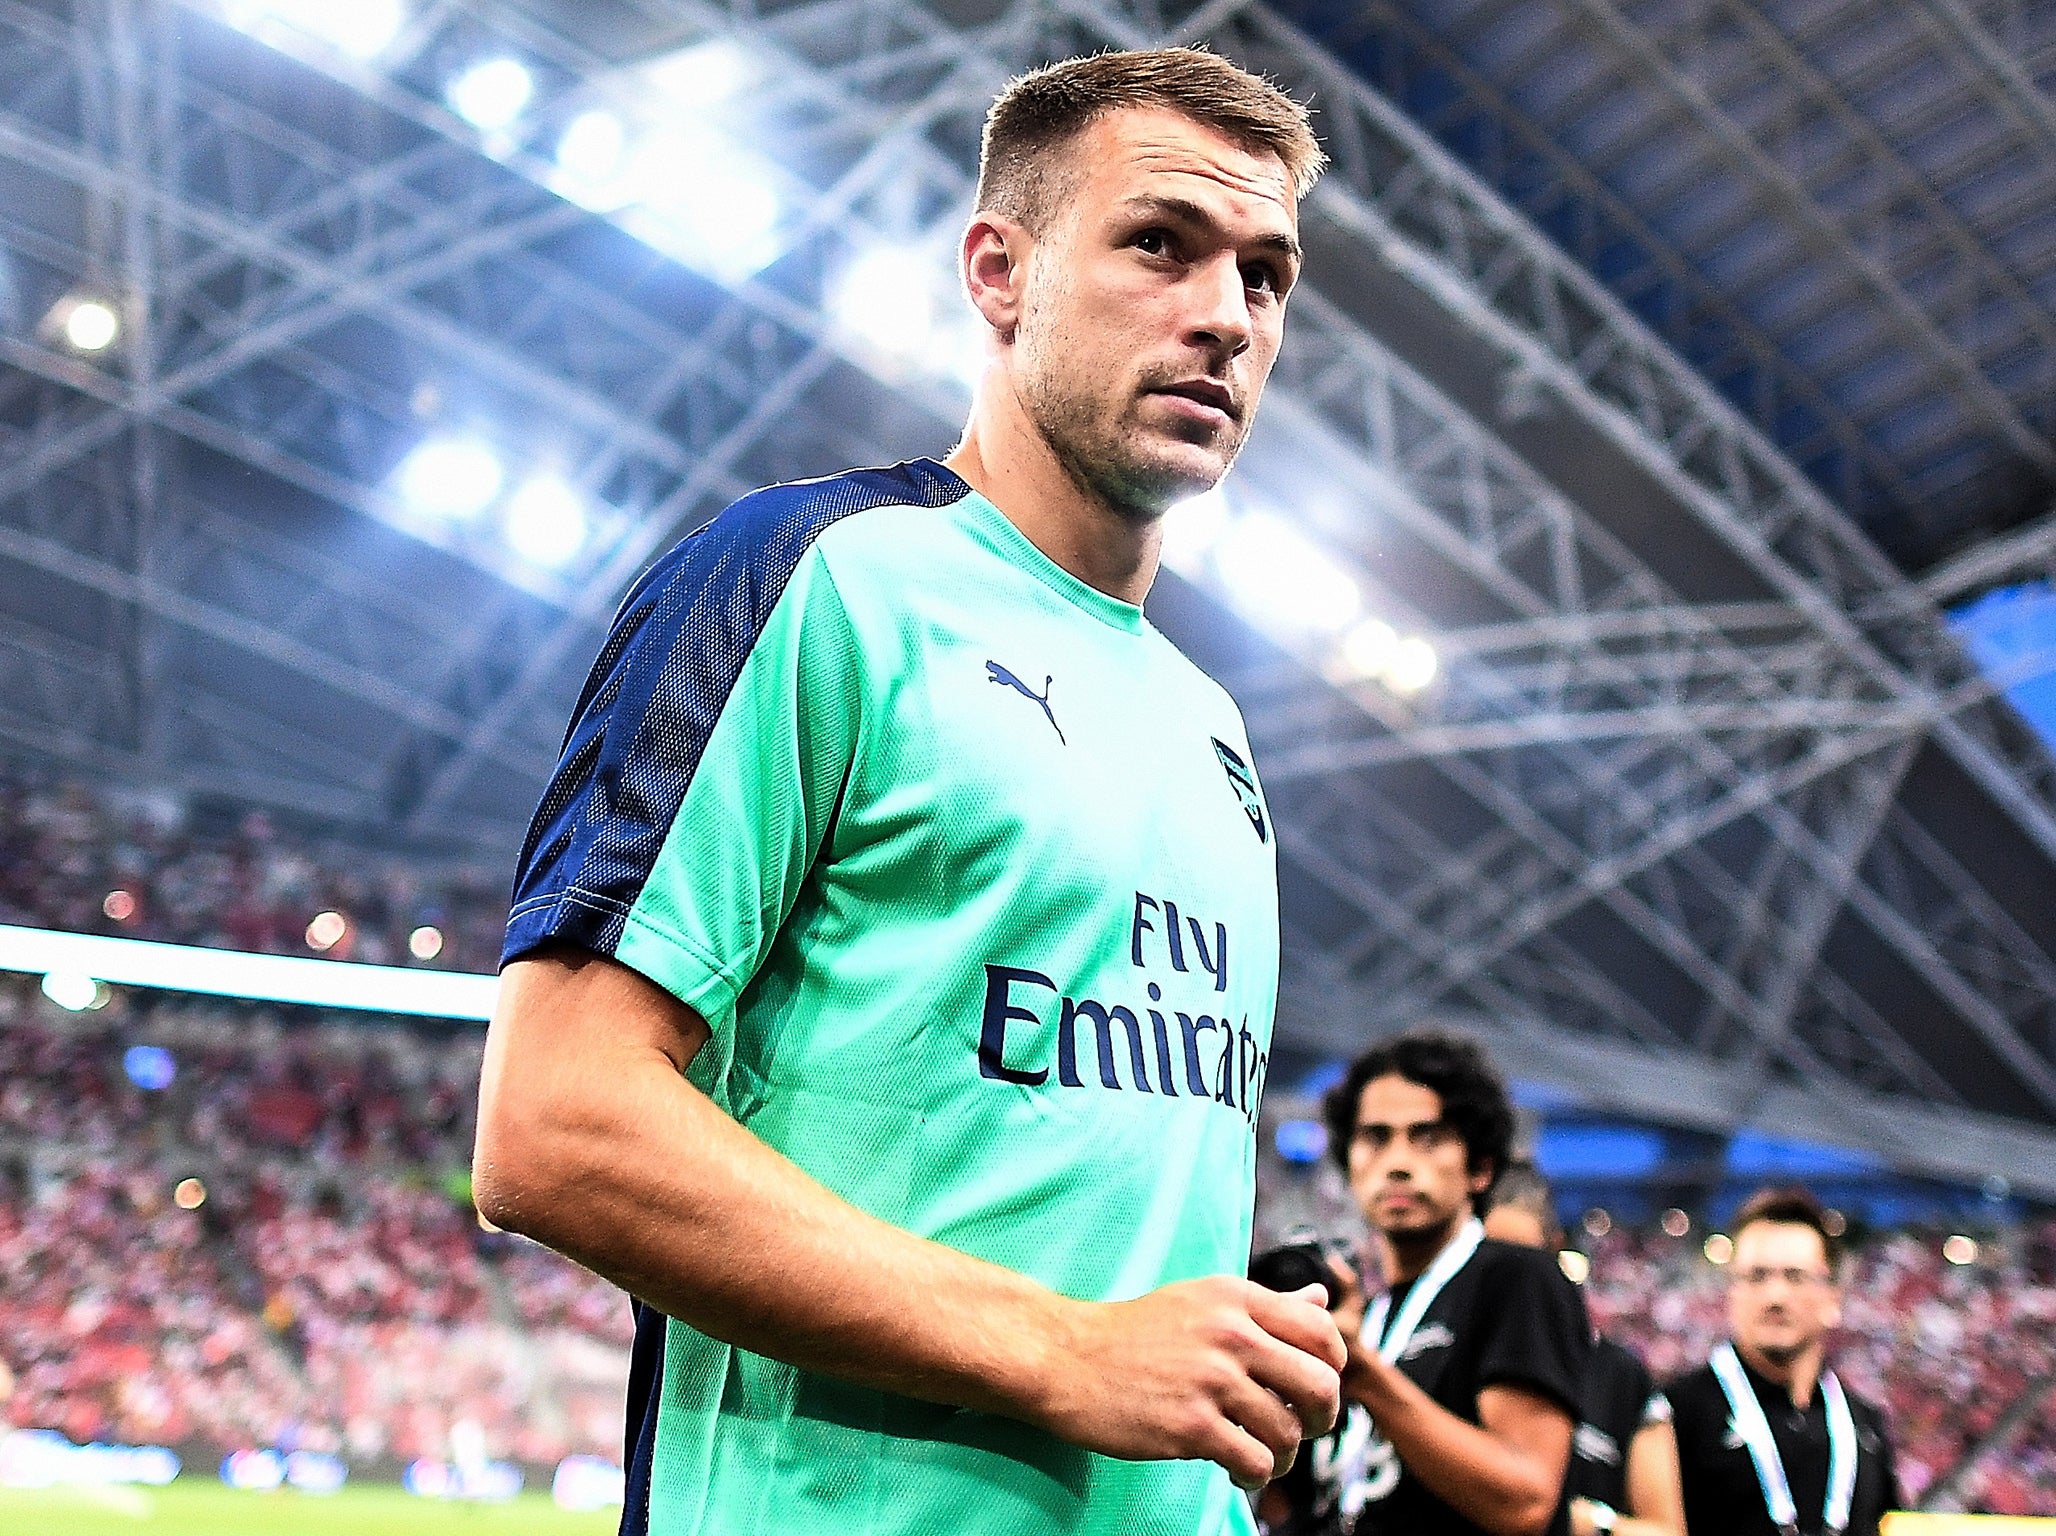 Transfer news, rumours - LIVE: Liverpool to rival Chelsea for Aaron Ramsey, Manchester United chase Yerry Mina, Arsenal target World Cup star